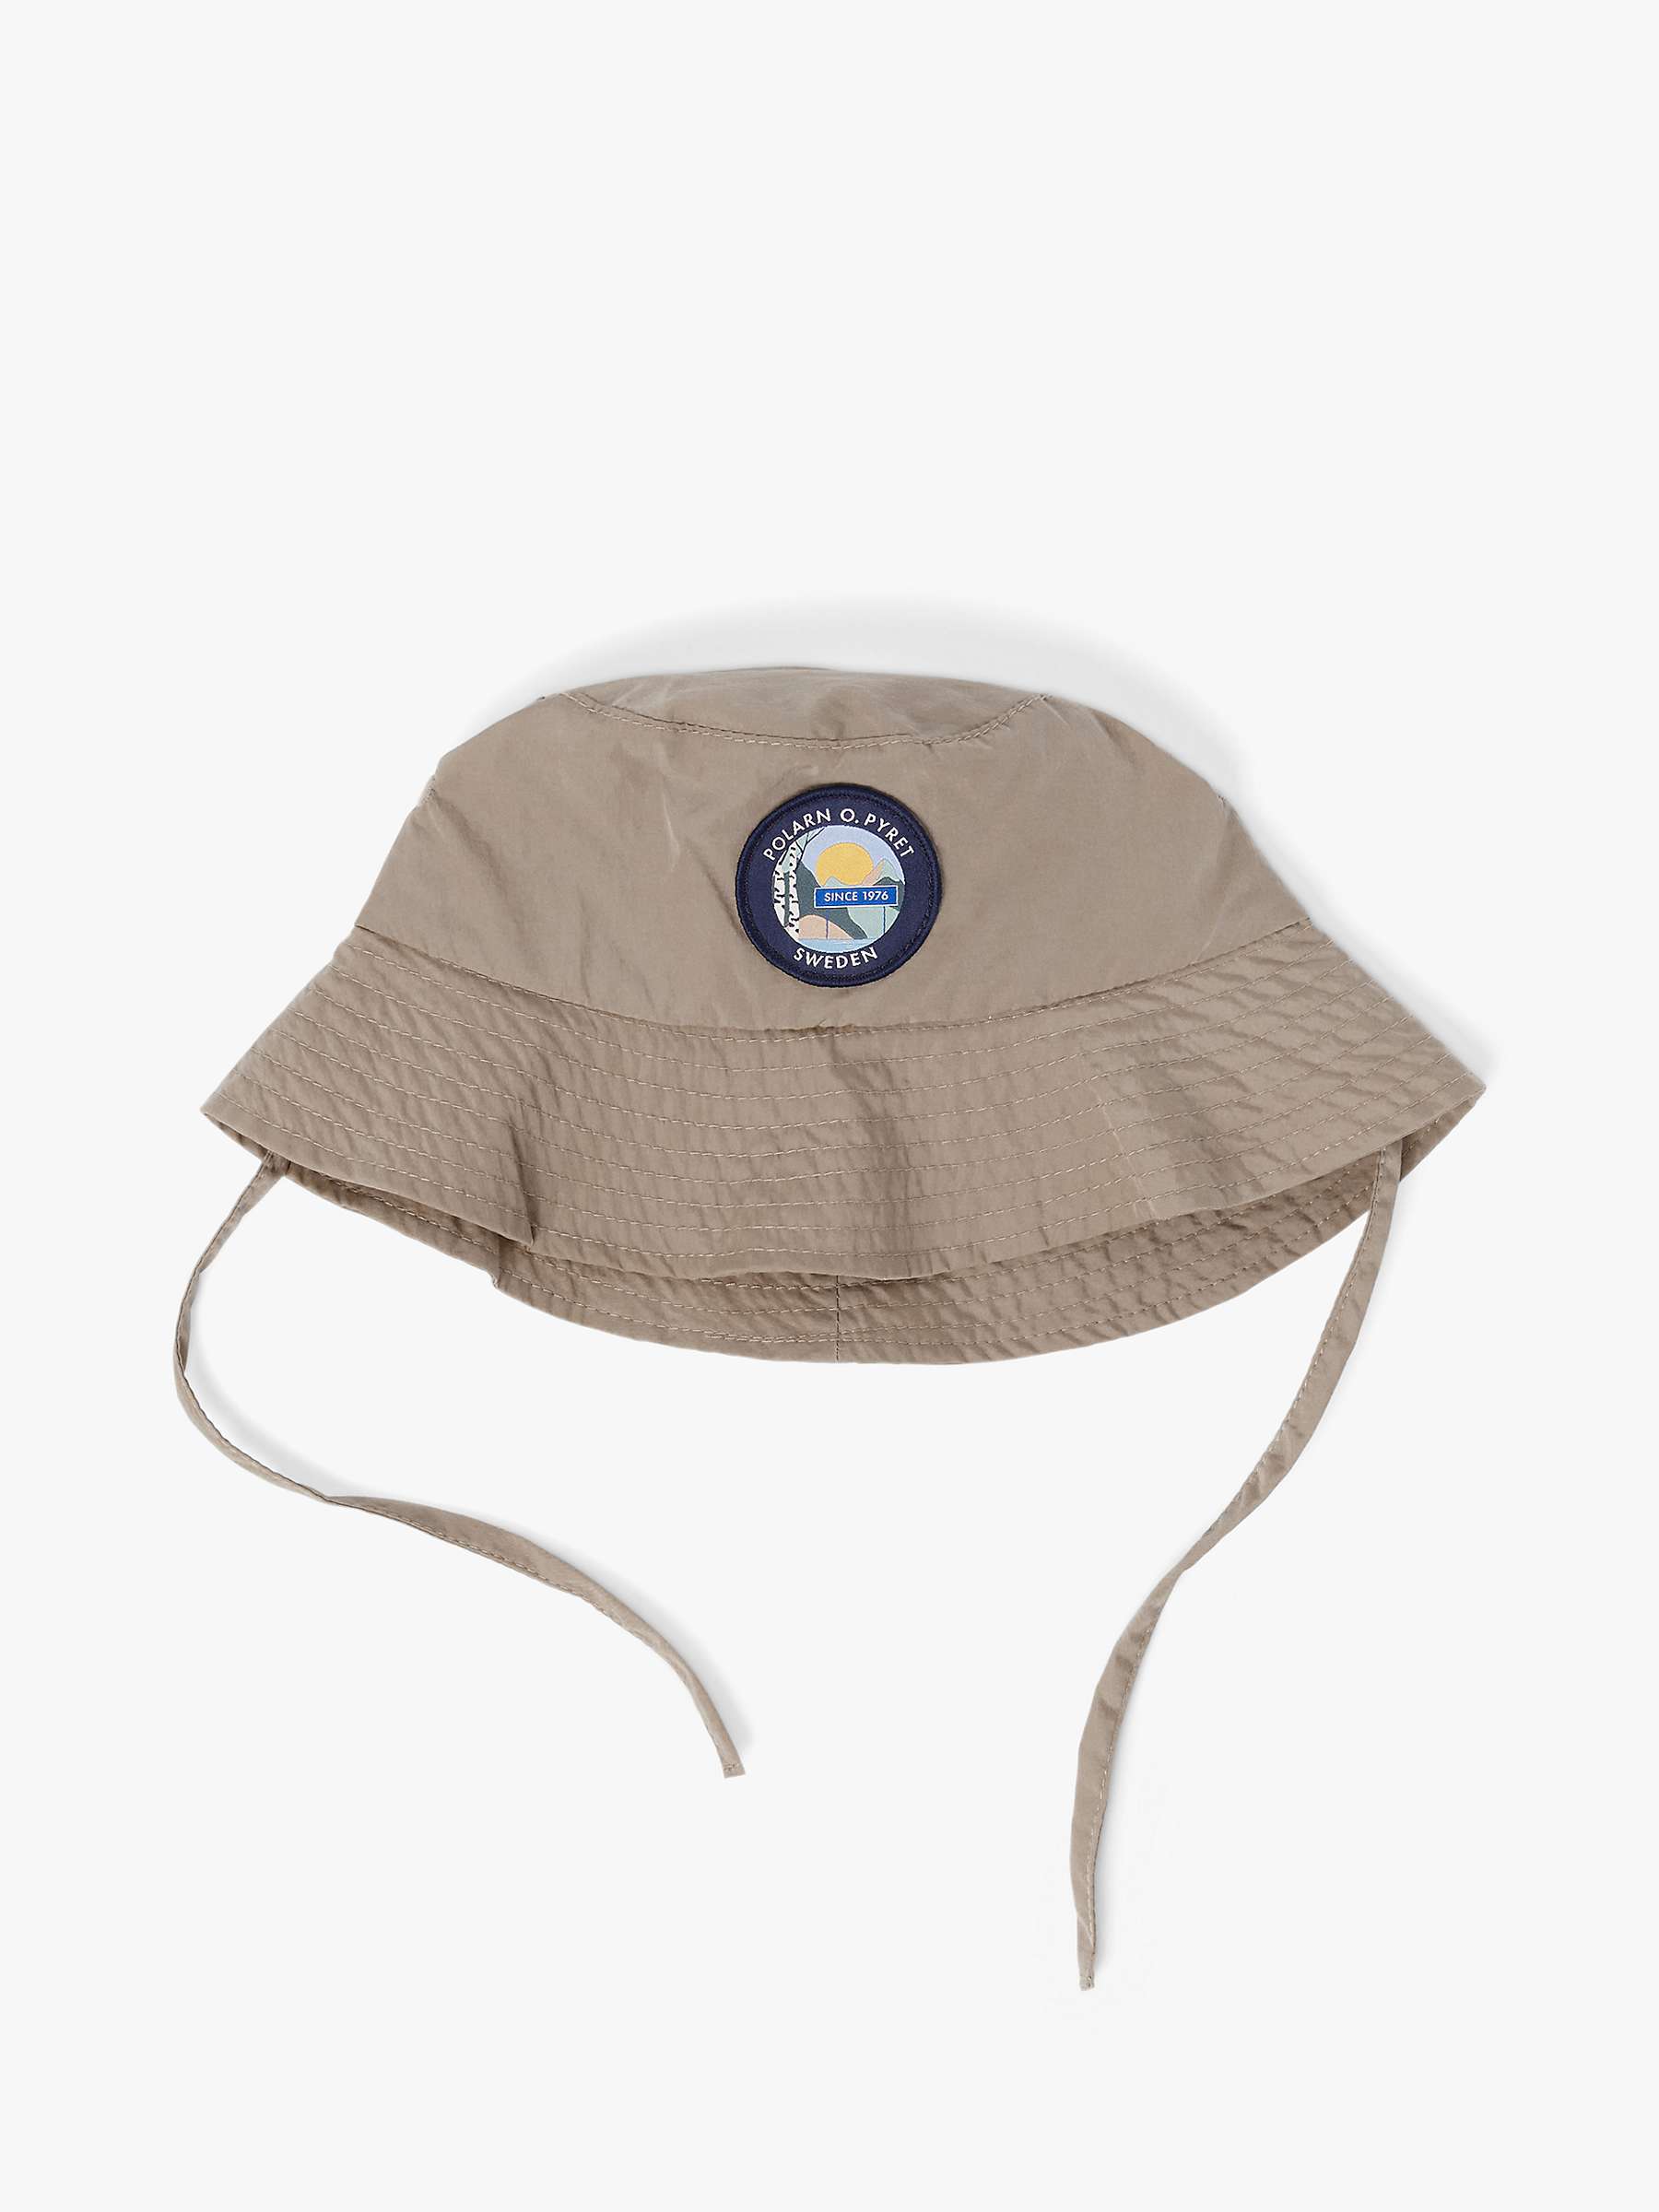 Buy Polarn O. Pyret Baby Bucket Hat, Natural Online at johnlewis.com